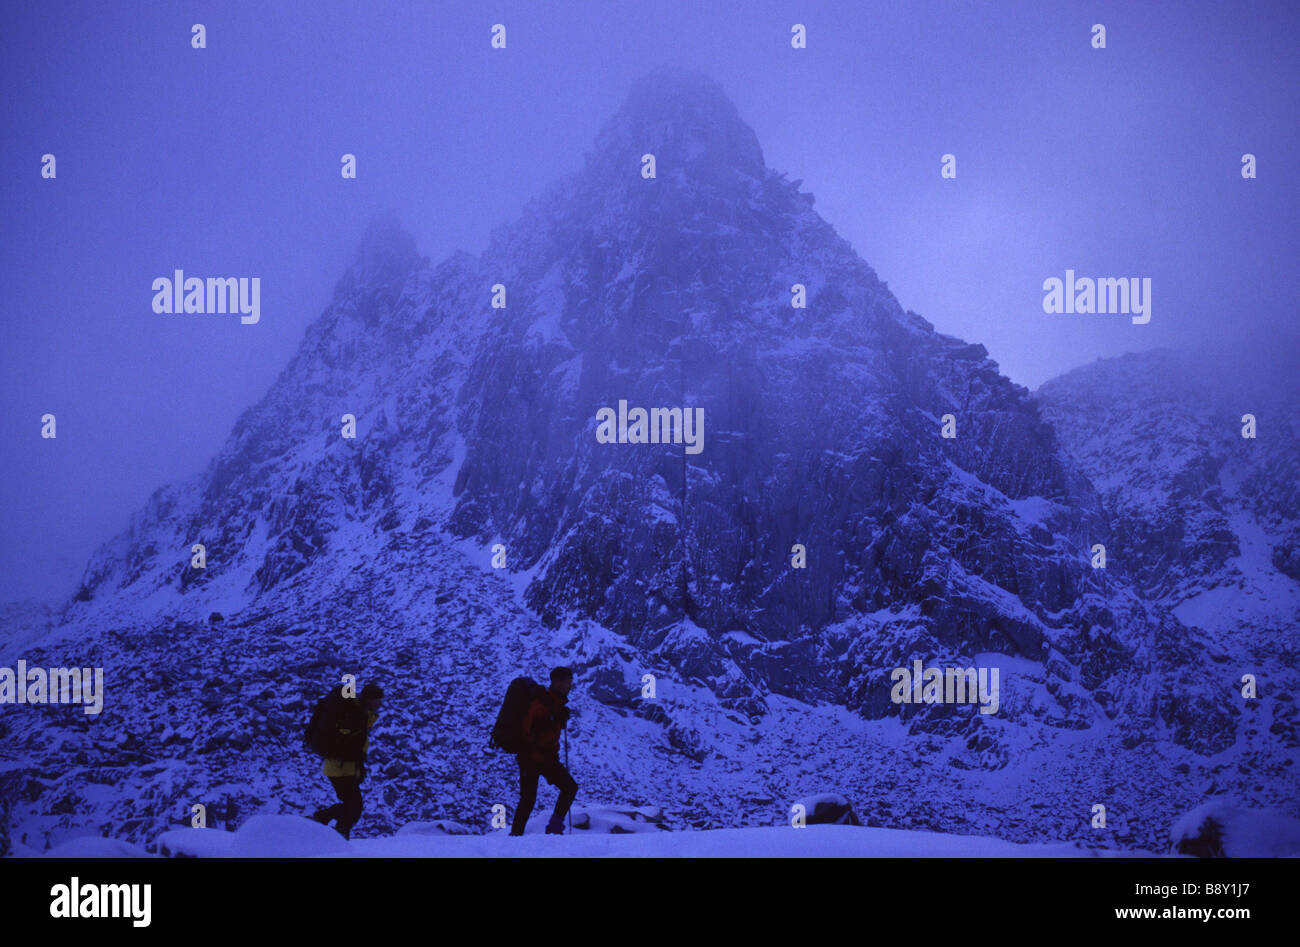 Silhouette of hikers walking in snow, Dusy Basin, Fresno, California, USA Stock Photo